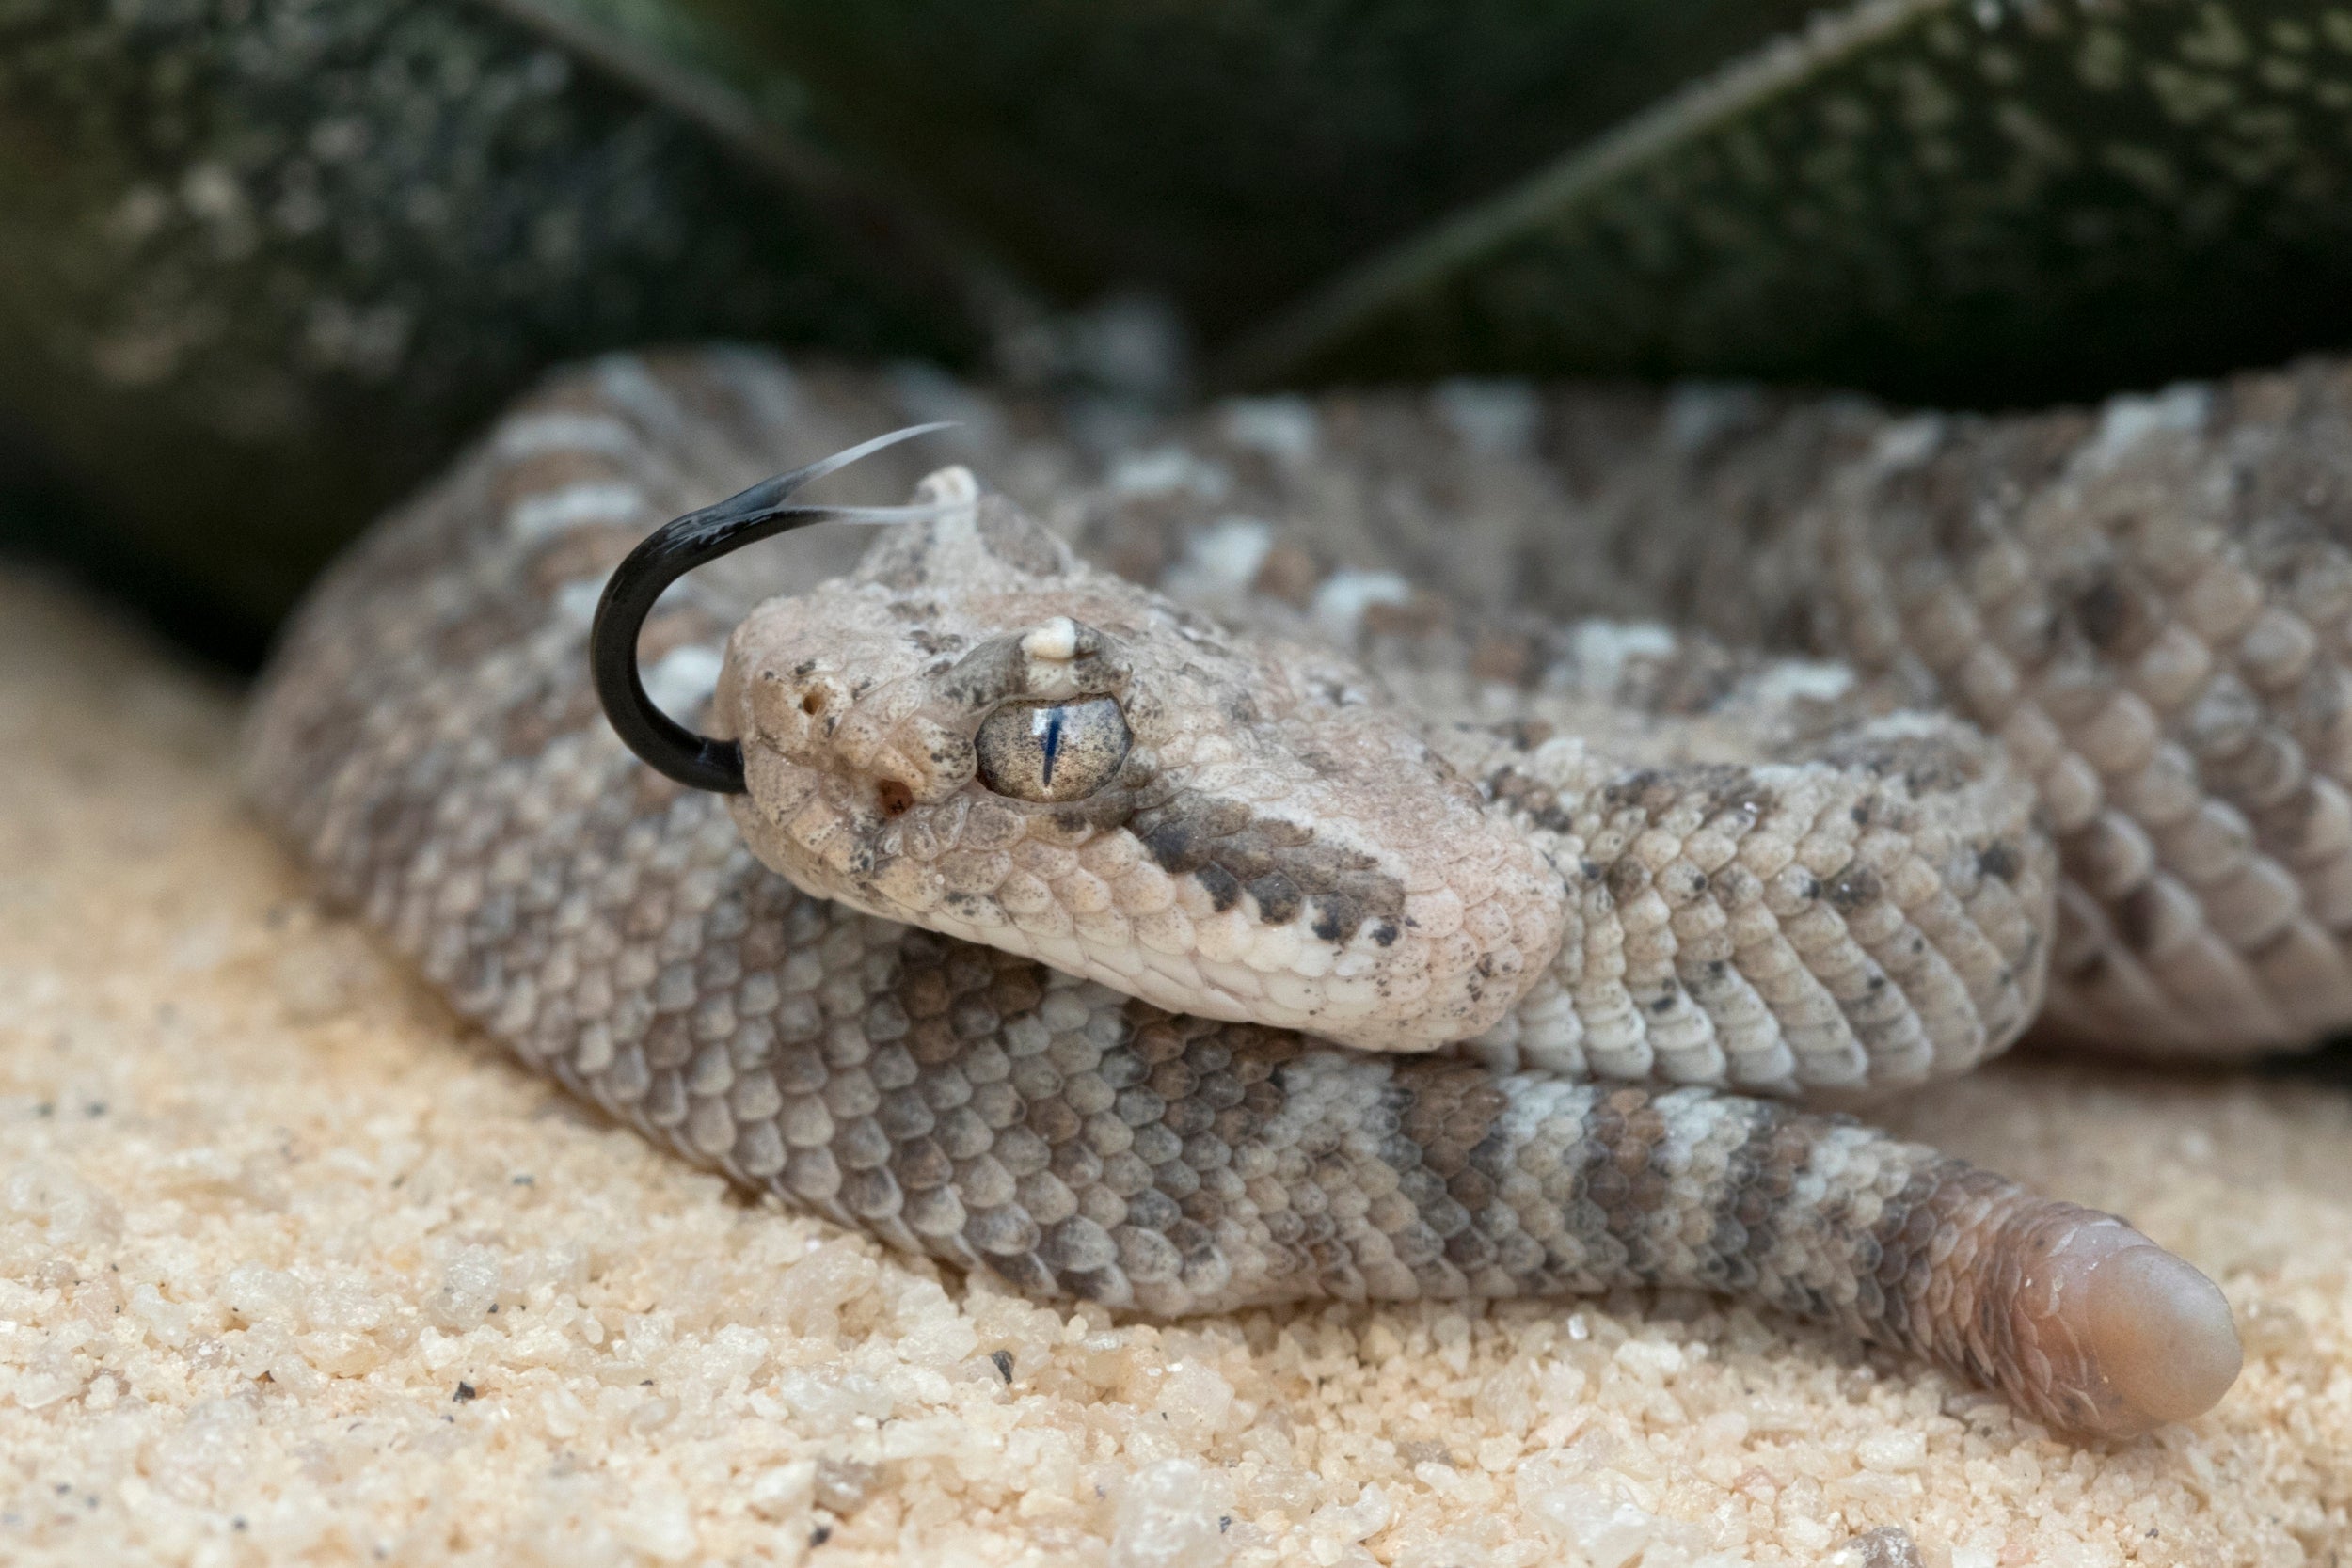 A newborn (two days old) sidewinder rattlesnake with one button rattle